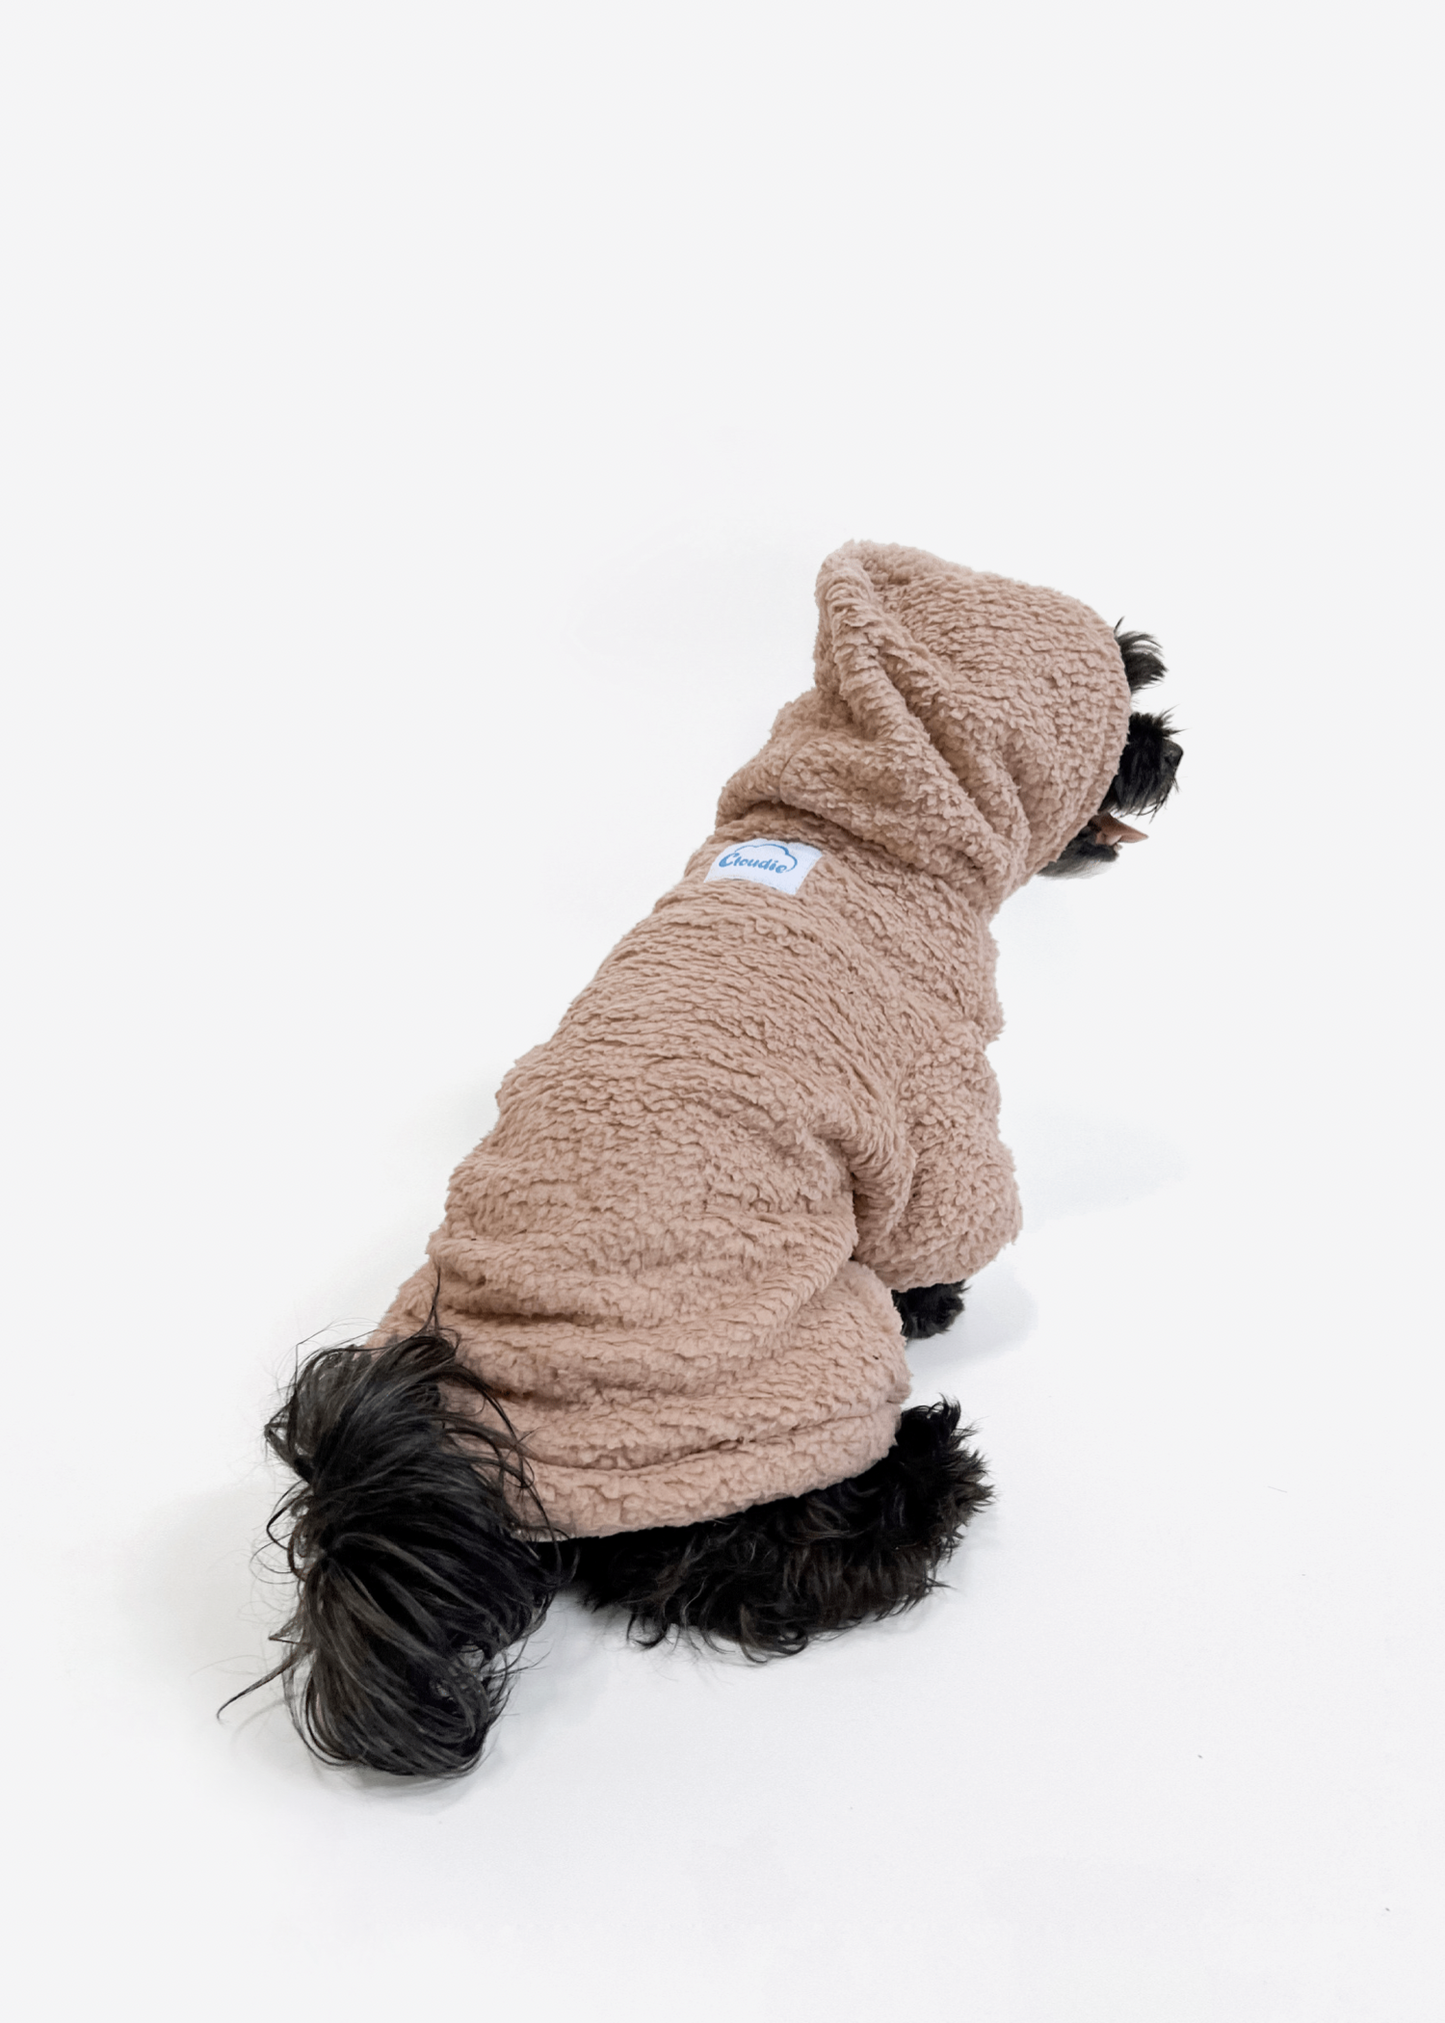 Cappuccino Brown Pet Size Cloudie® Original - The Cloudie Co. ultra soft cosy comfy Giant Wearable Blanket hoodie Unisex home or travel blanket hoodie travel blanket sofa blanket with sleeves hoodie blanket